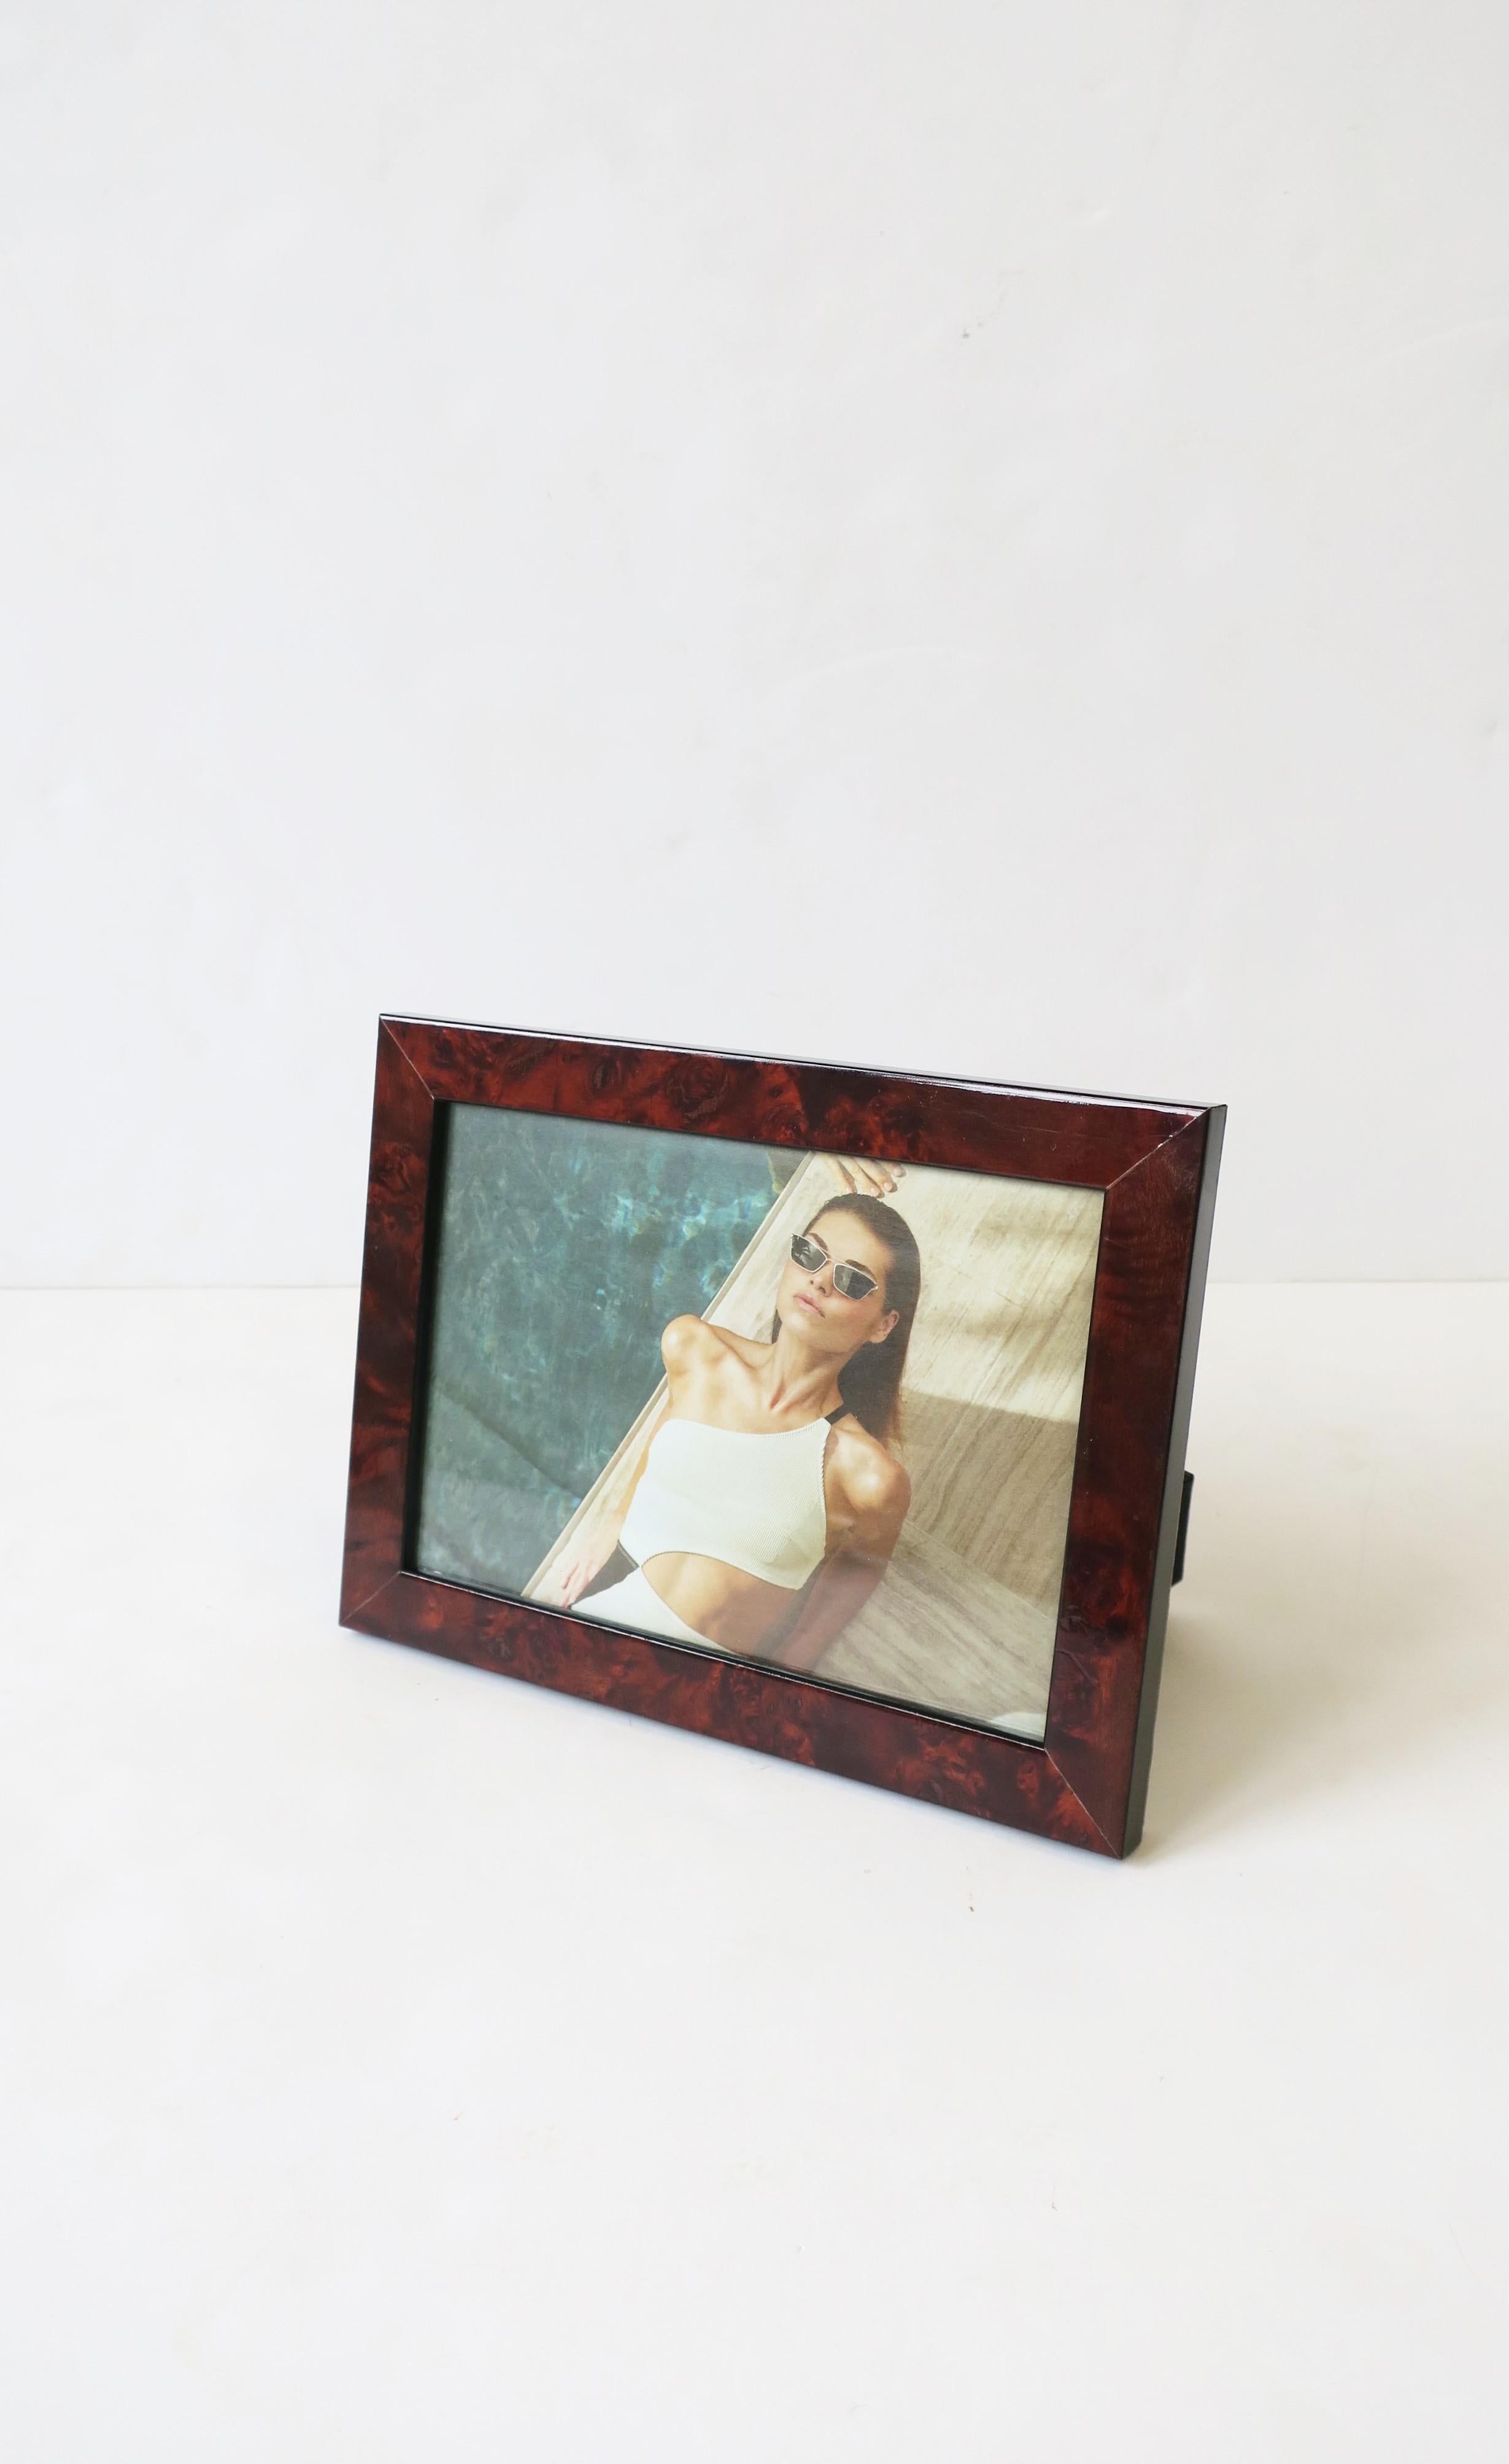 A beautiful picture frame in burl wood and a dark blue shagreen-esque embossed back, finished with brass hardware. Frame can sit both horizontal or vertical as demonstrated in images. Frame measures: 6.25